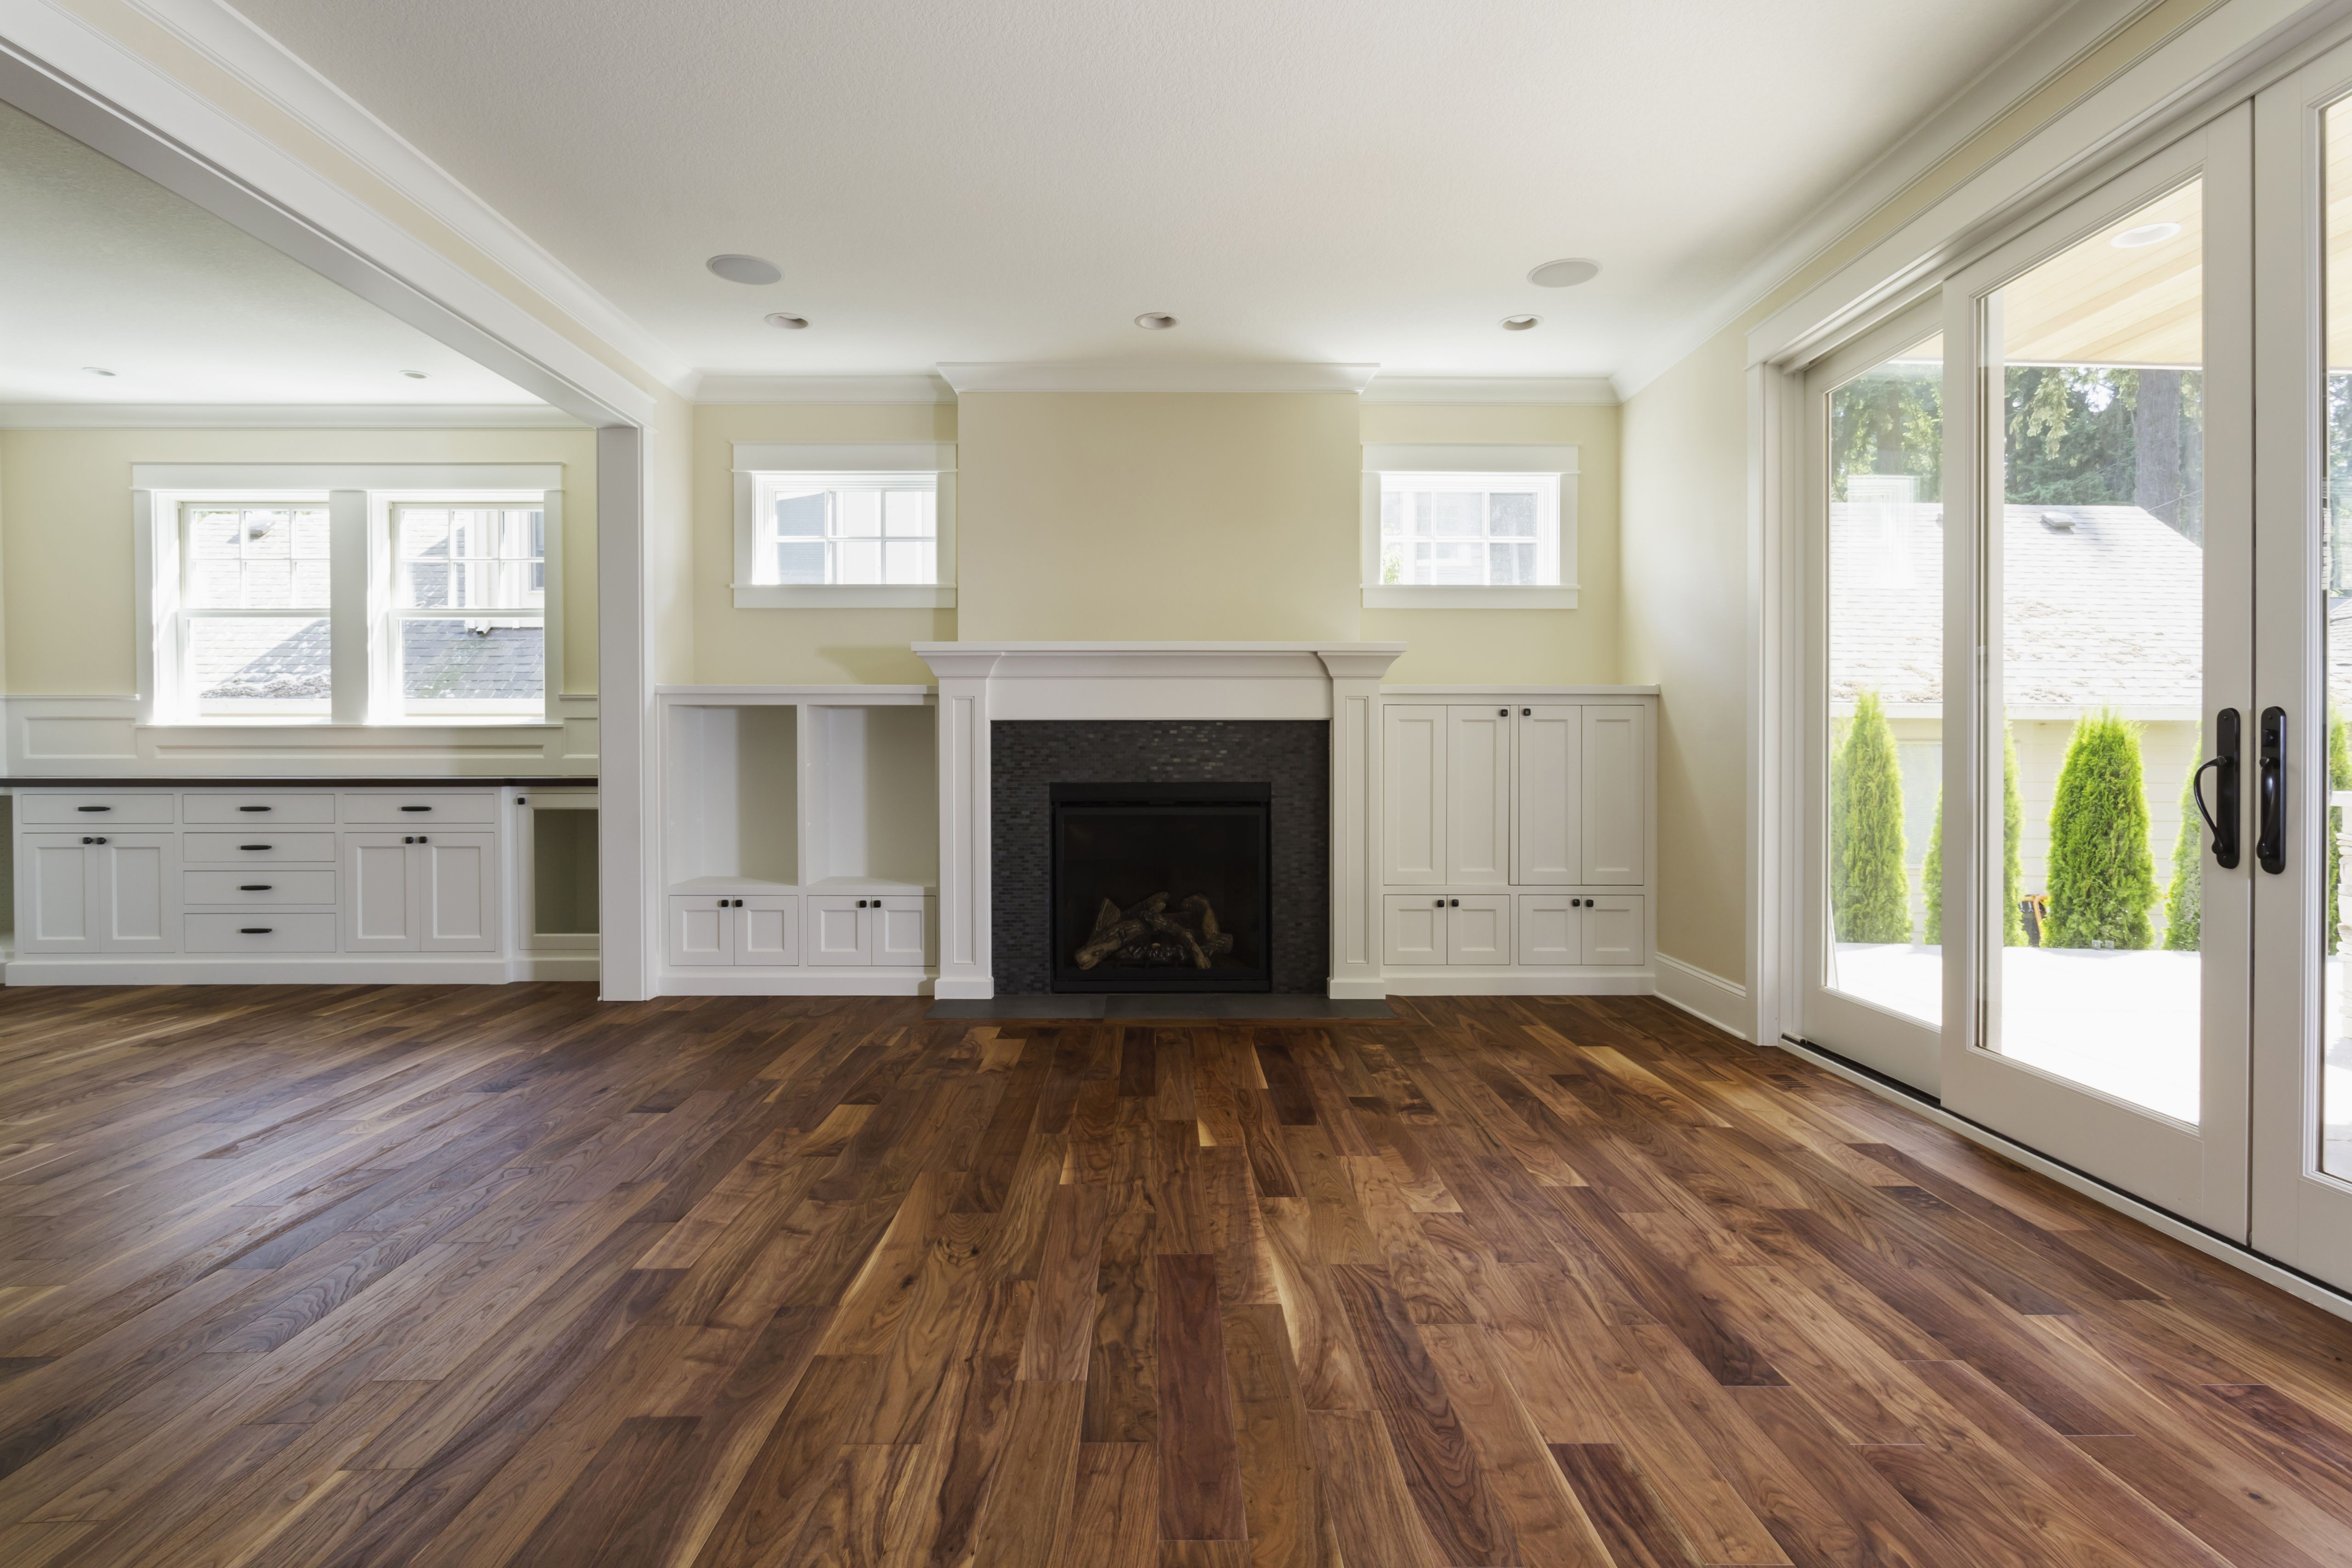 15 Perfect Professional Hardwood Floor Refinishing Near Me 2024 free download professional hardwood floor refinishing near me of the pros and cons of prefinished hardwood flooring for fireplace and built in shelves in living room 482143011 57bef8e33df78cc16e035397